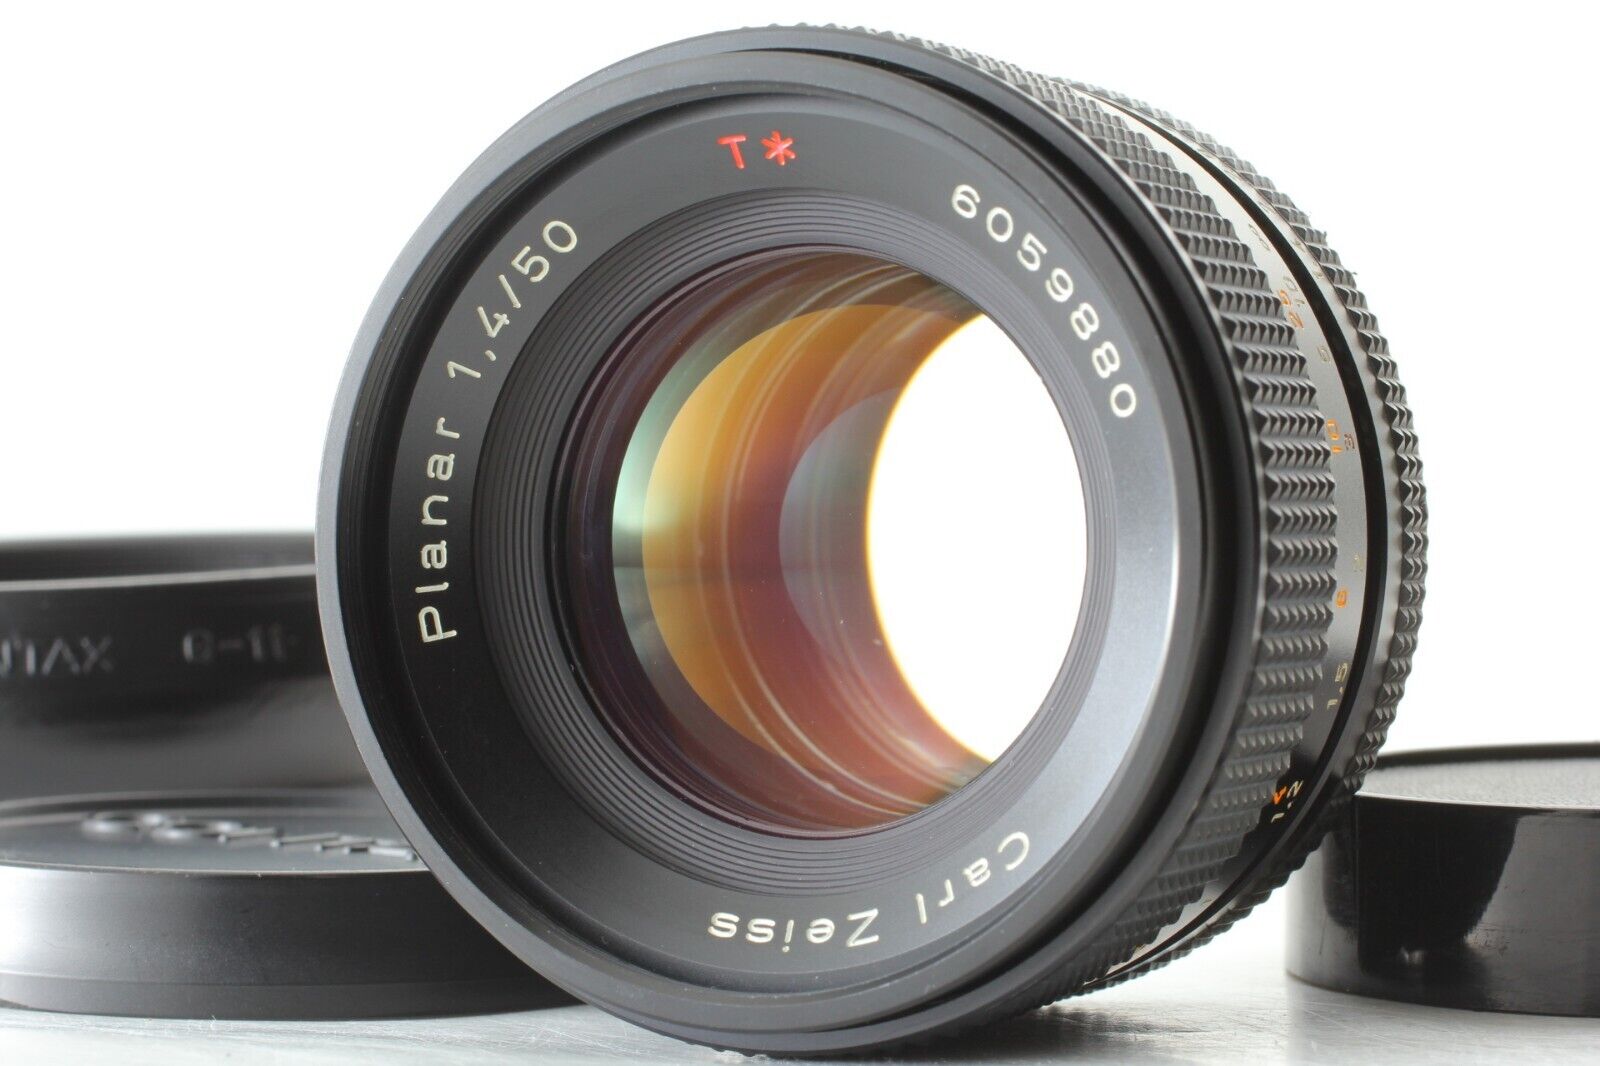 Contax Carl Zeiss Planar T* 50mm f1.4 AEJを21,100円でお買取りしました。